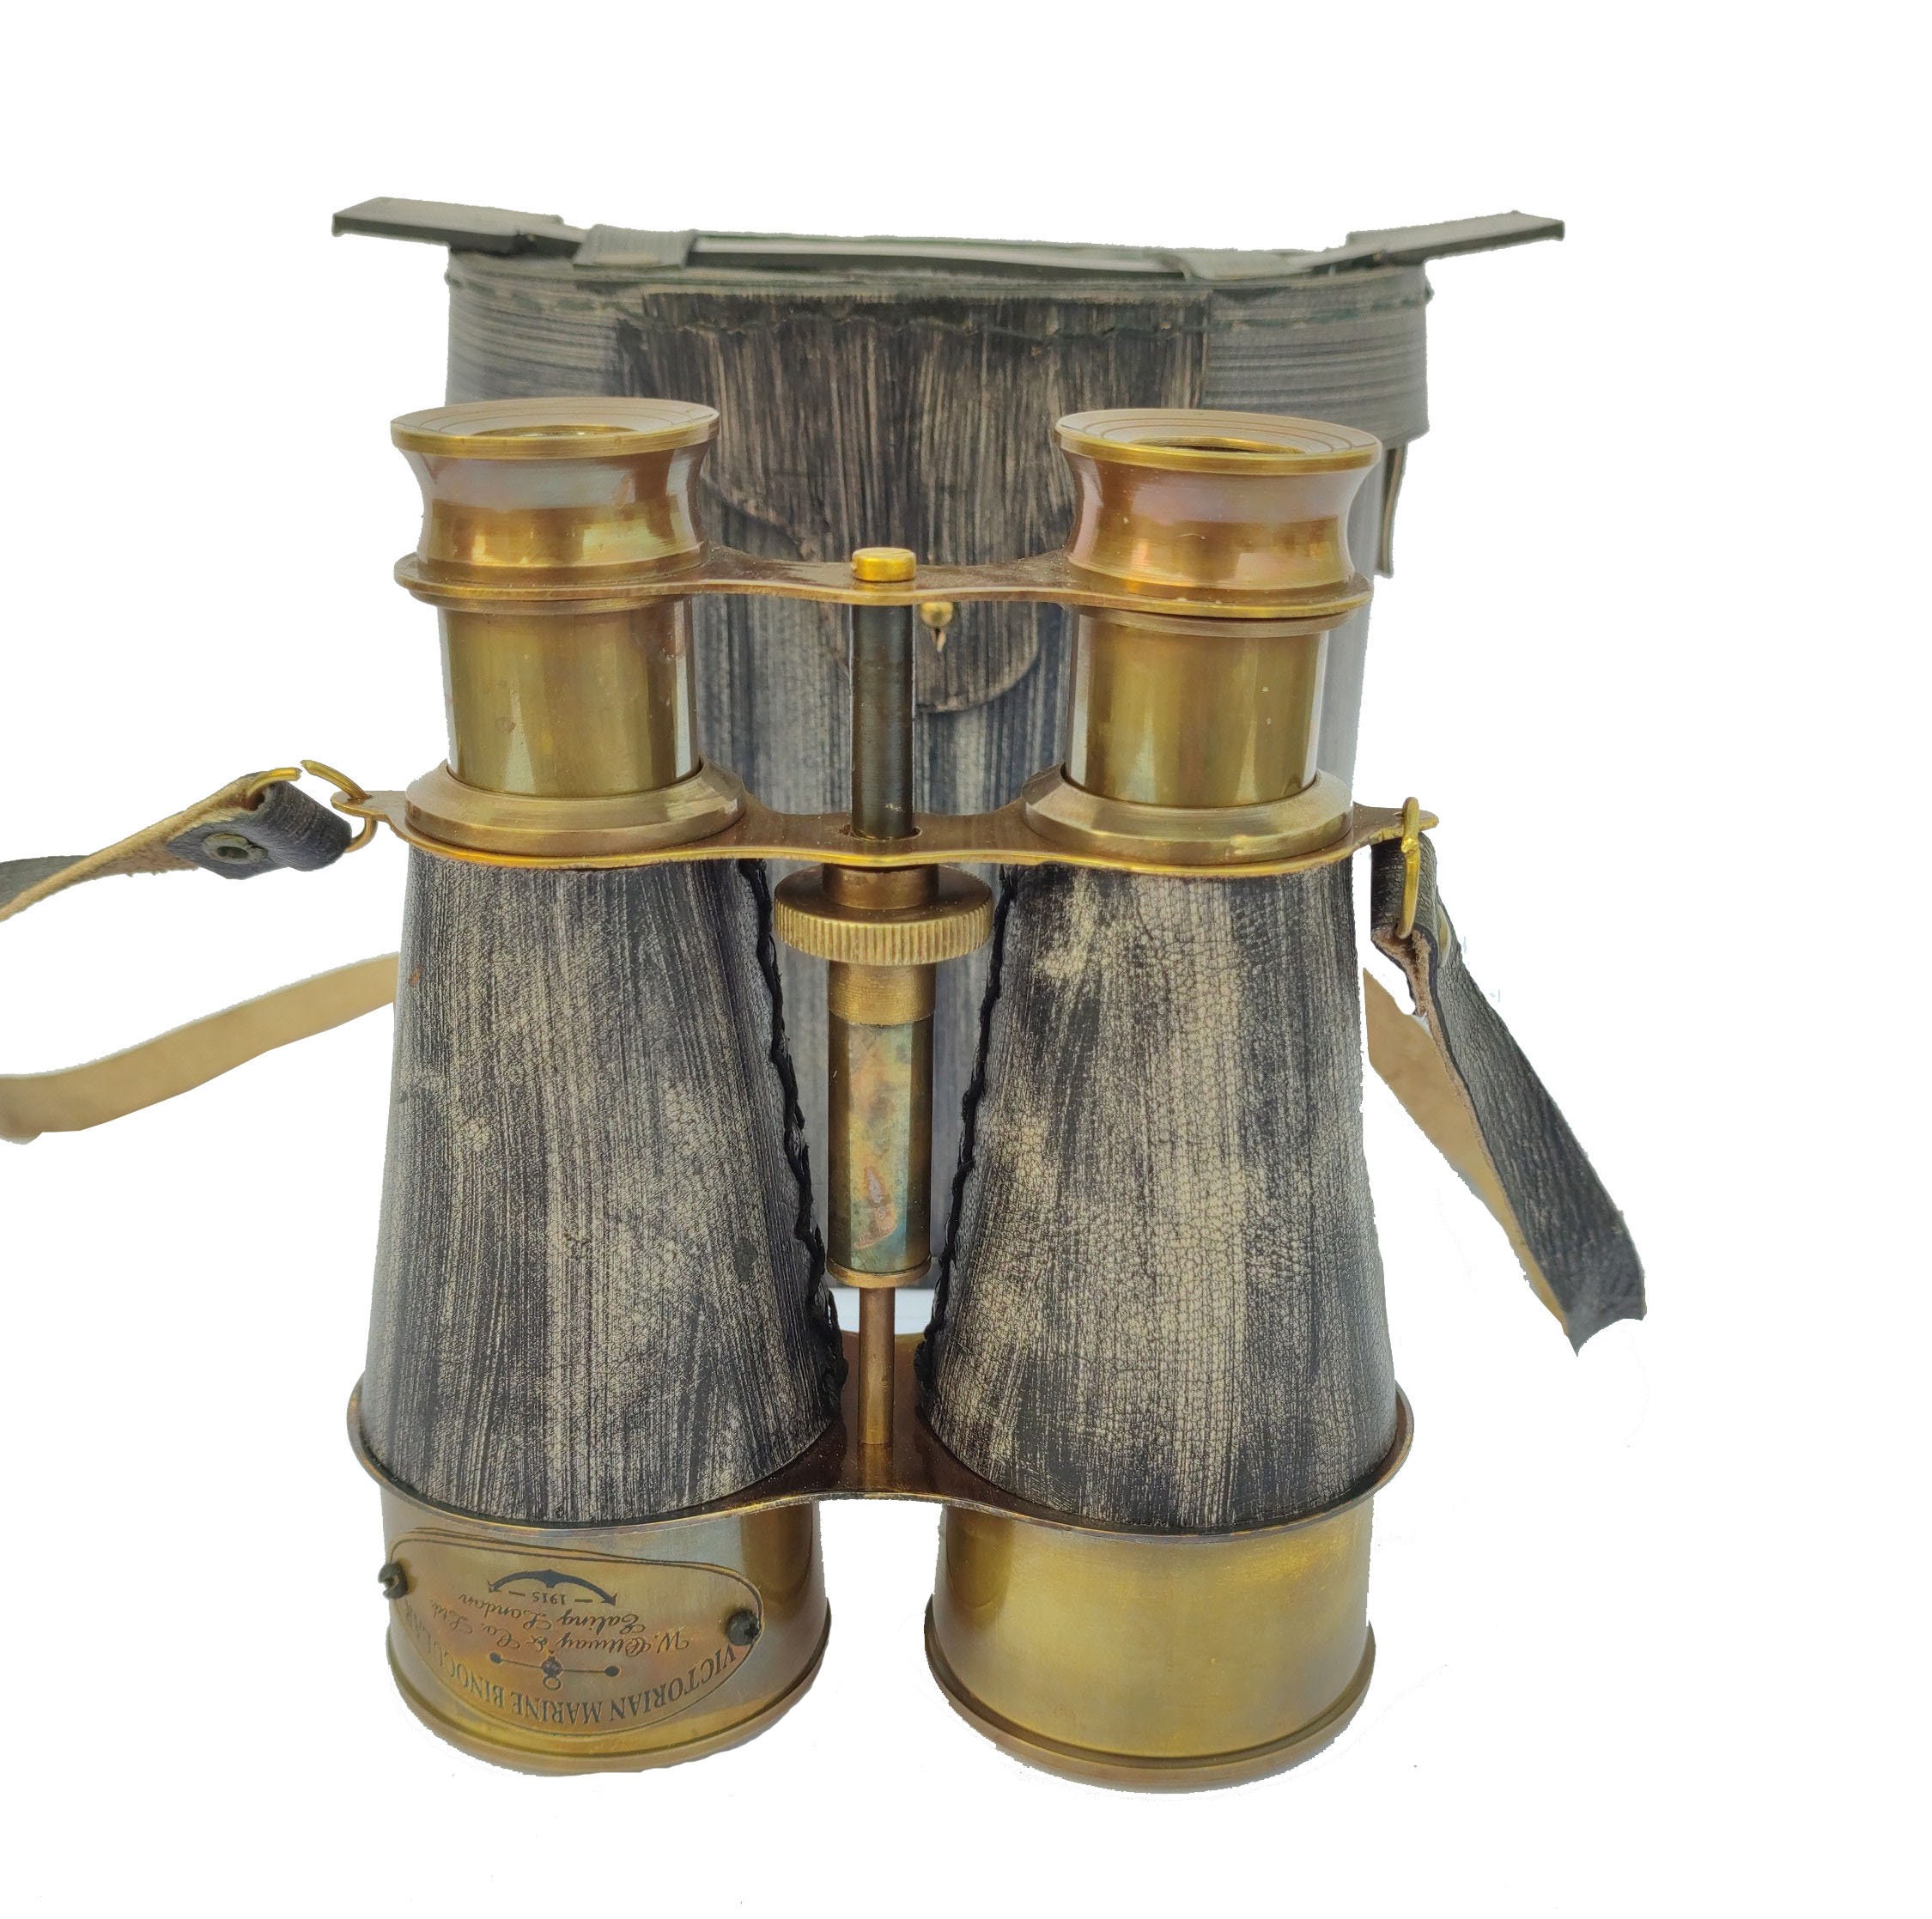 Details about   Antique Brass Victorian Marine Binocular With Grey Leather Box Maritime 